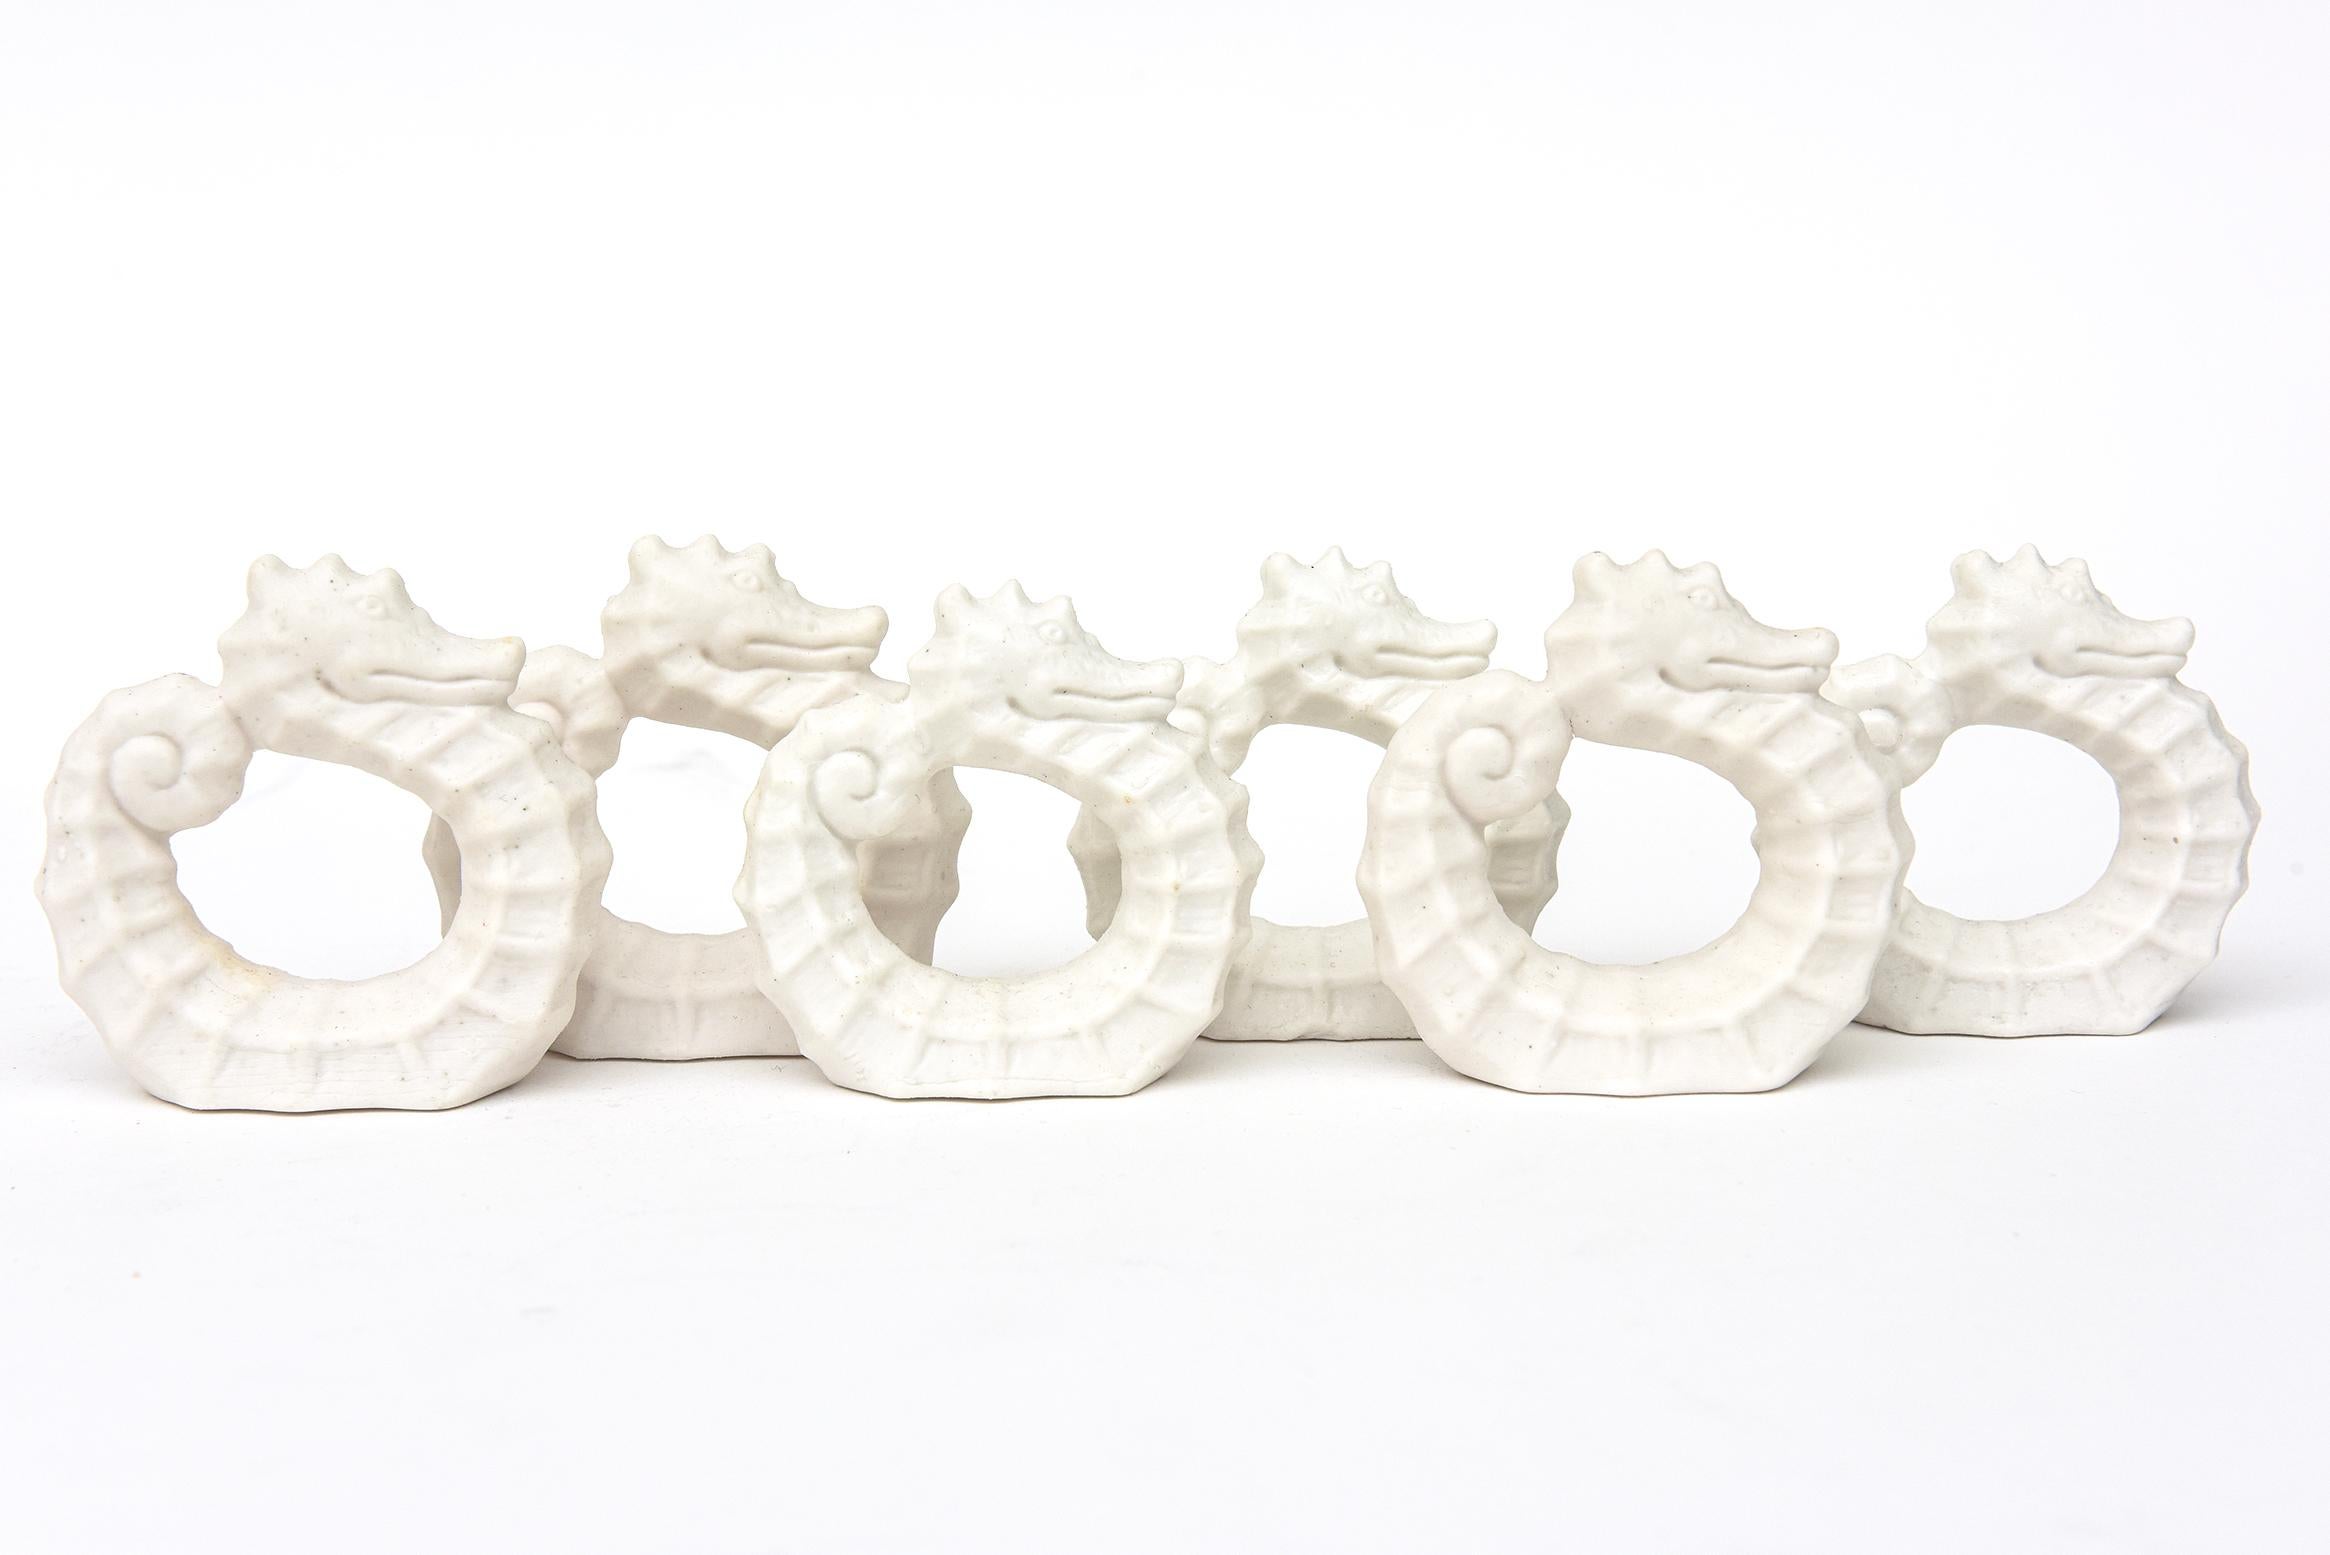 This set of 6 vintage white bisque matt porcelain seahorse napkin rings are in their original box and were never used. They are hallmarked on the bottom Shafford Japan.
Great for your entertaining and table scape. The seahorse is very desirable in